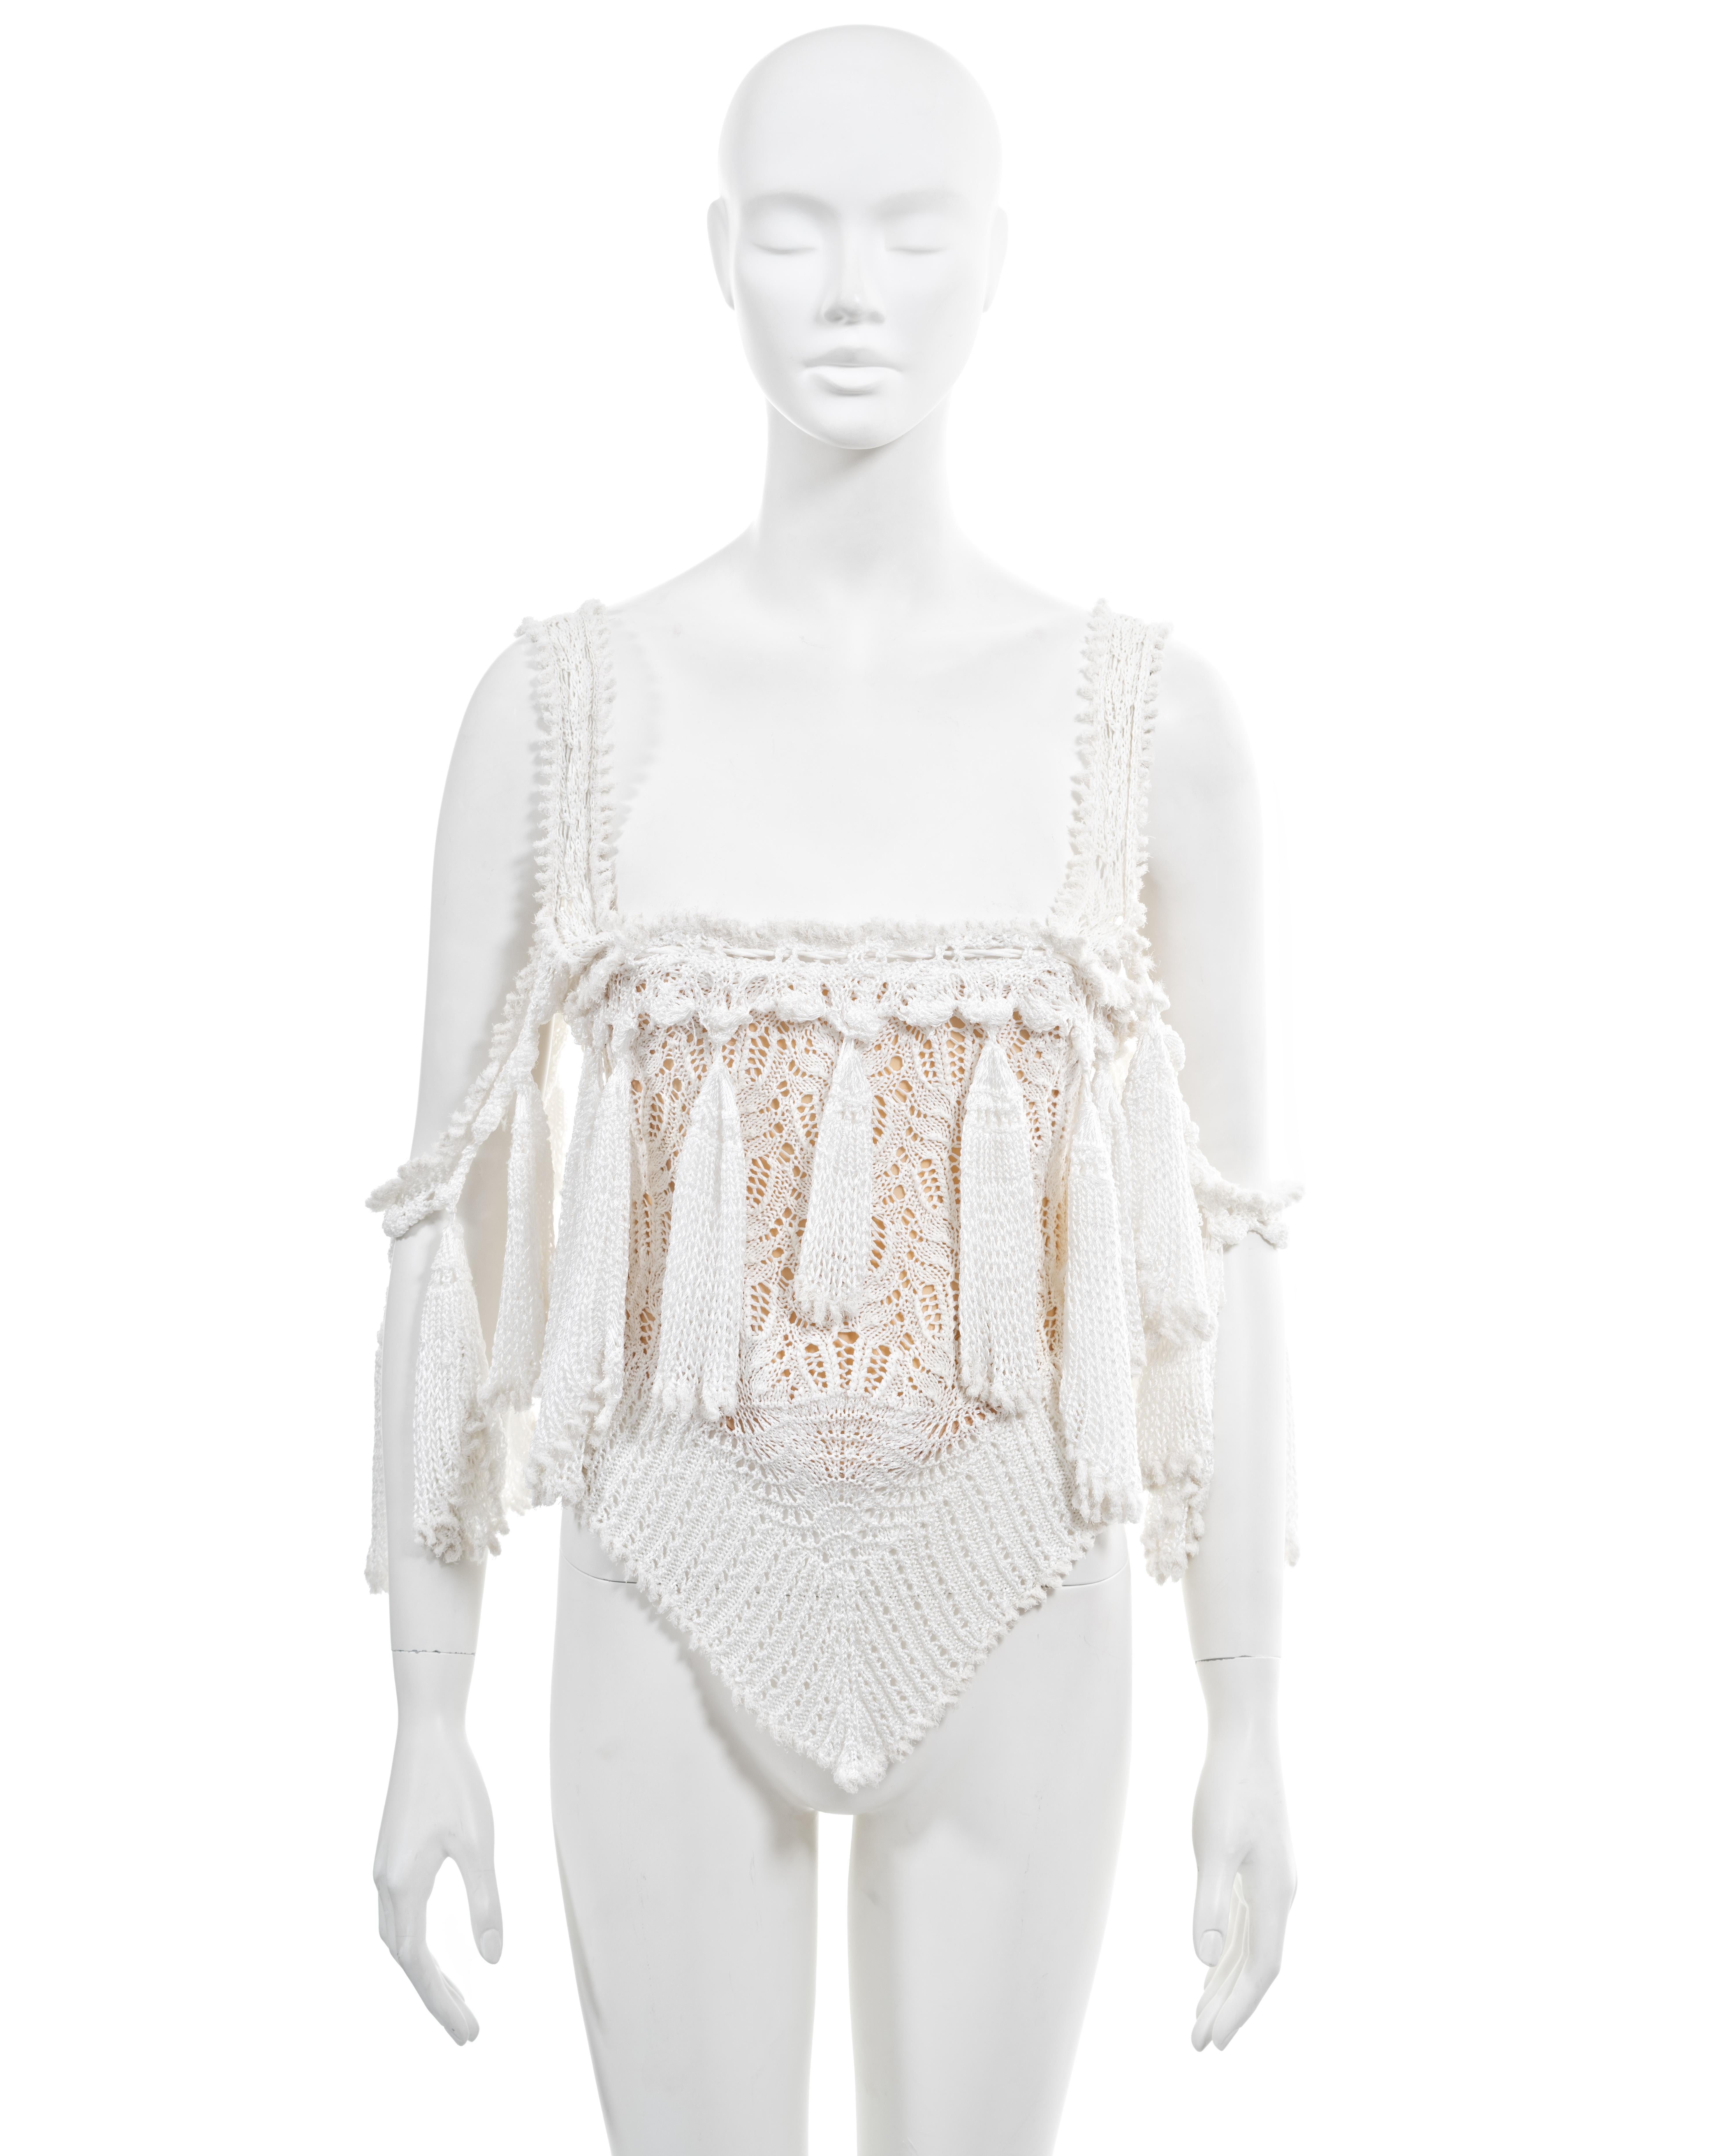 ▪ Archival Vivienne Westwood corset 
▪ Spring-Summer 1994, 'Cafe Society' Collection
▪ Sold by One of a Kind Archive
▪ Museum Grade
▪ White knitted cotton lace 
▪ Long tassels adorning the neckline and shoulder straps 
▪ Built-in nude corset with